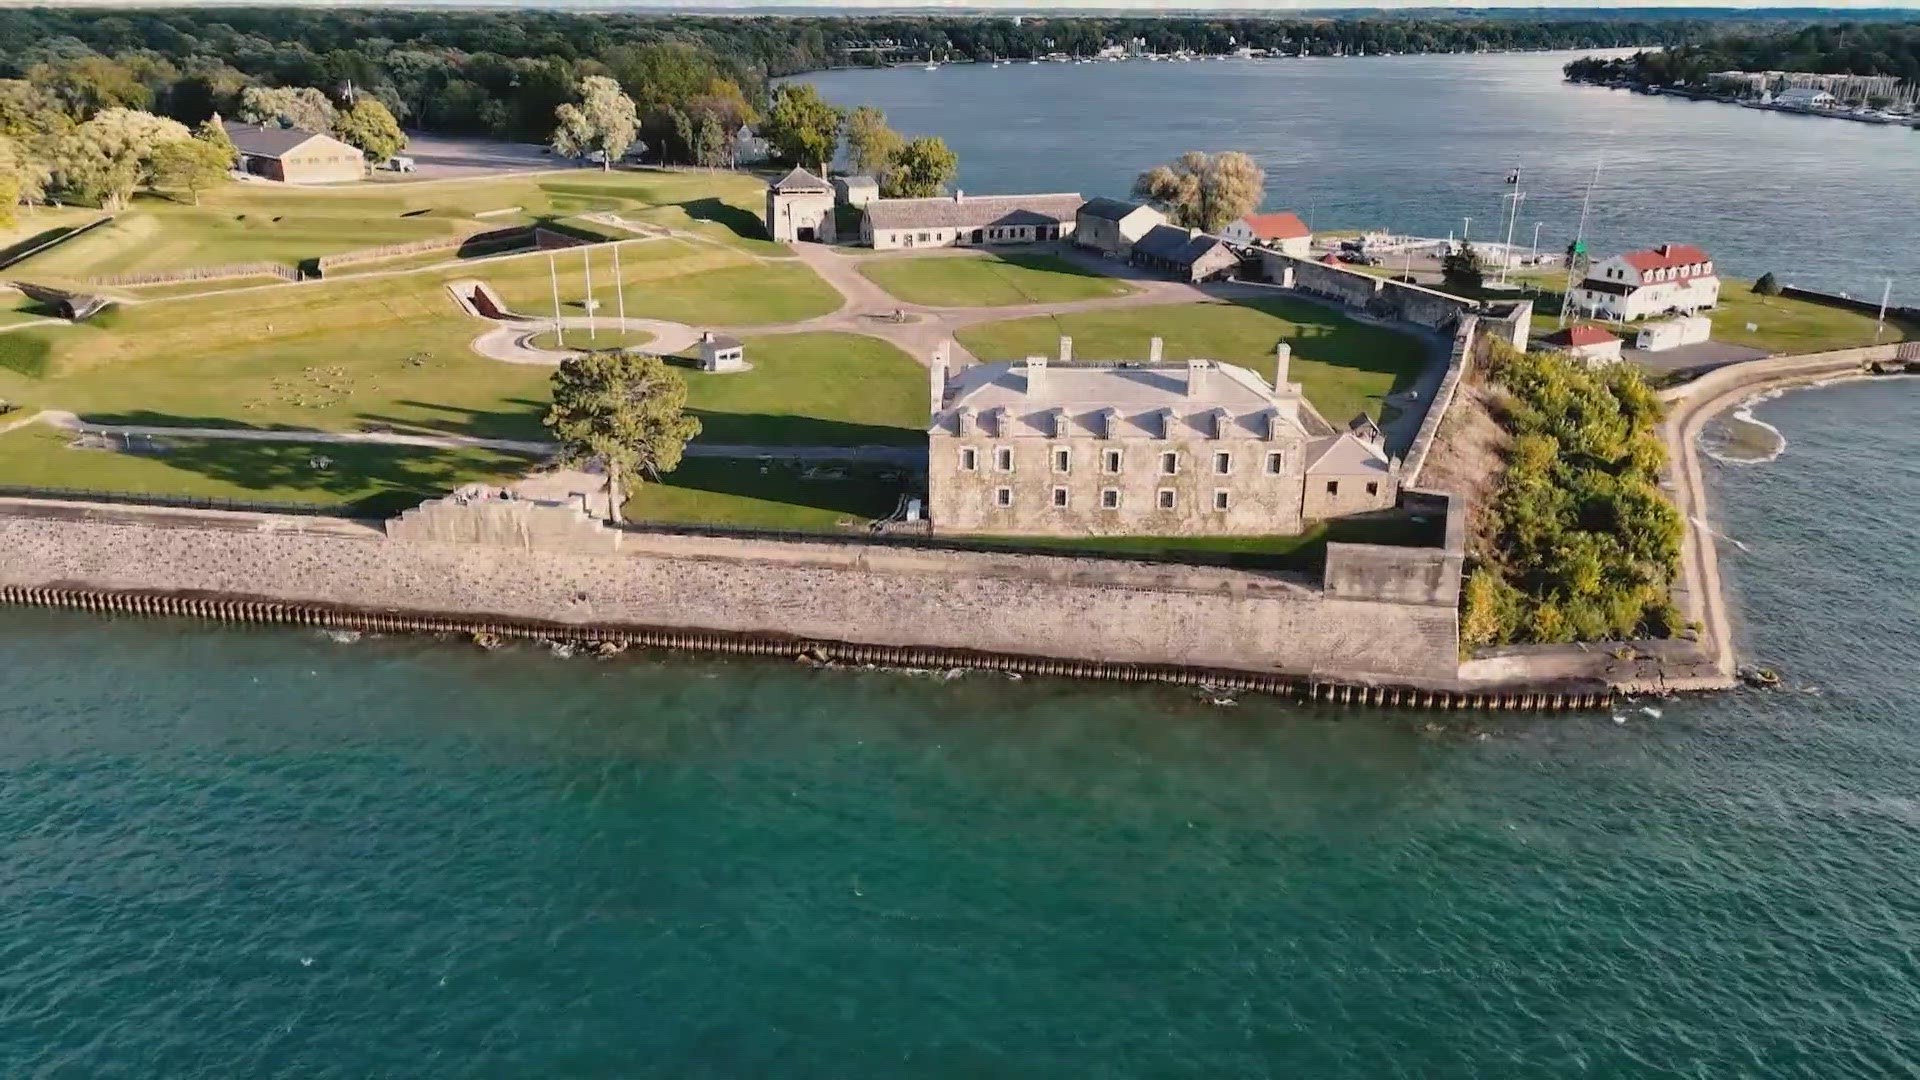 A not-for-profit group runs Old Fort Niagara and teaches guests the history and daily life experiences of the people who lived and worked there.